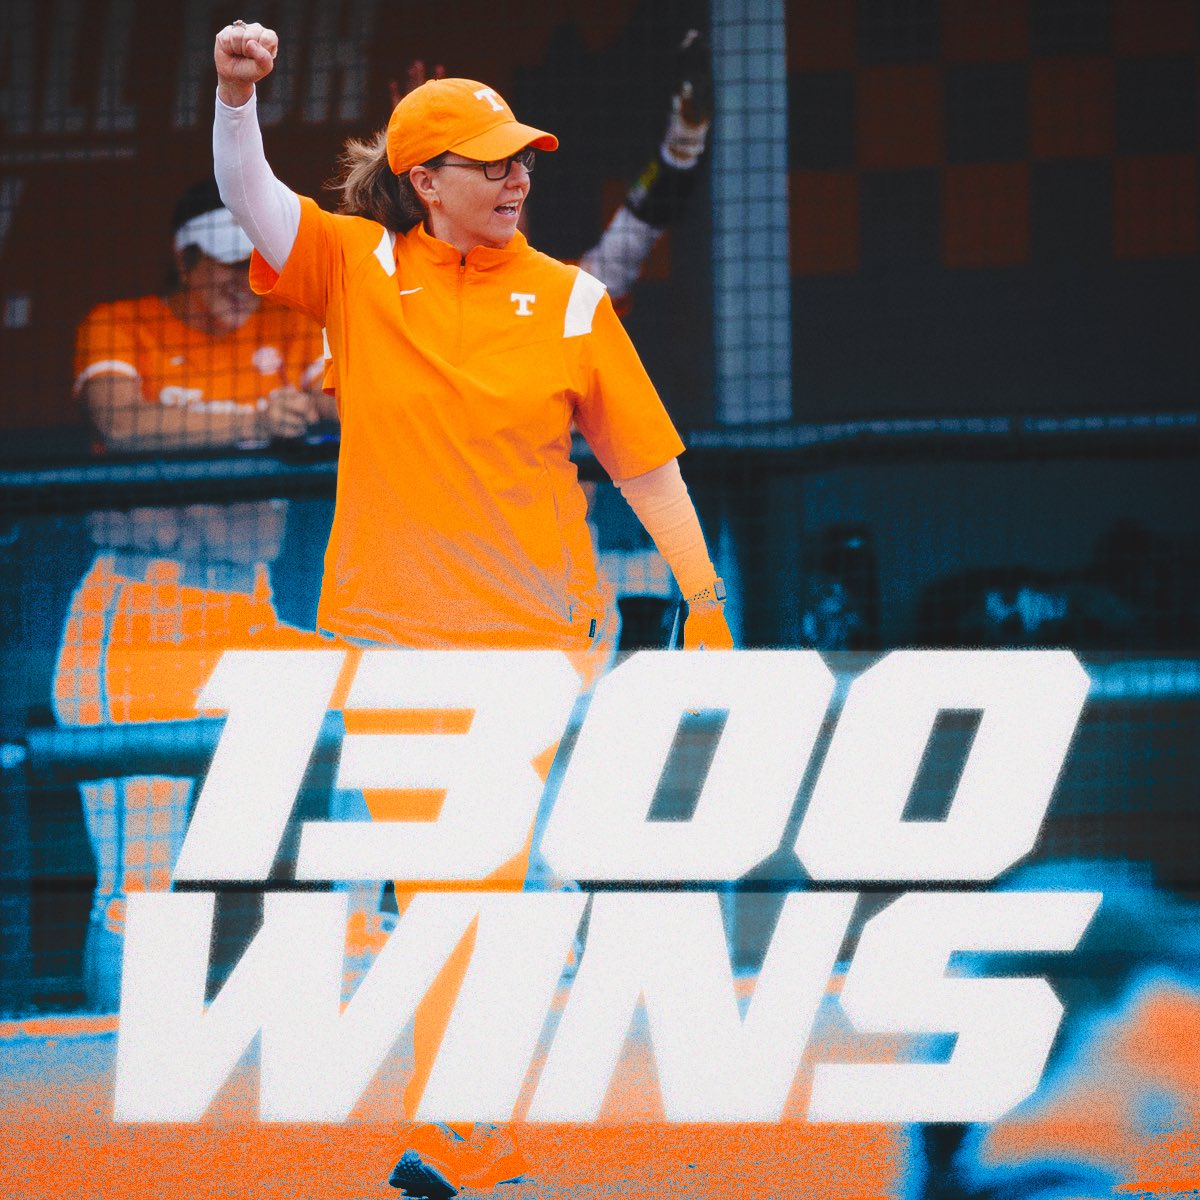 The number speaks for itself. 1300 wins. One illustrious career. Congratulations @KarenWeekly 🐐